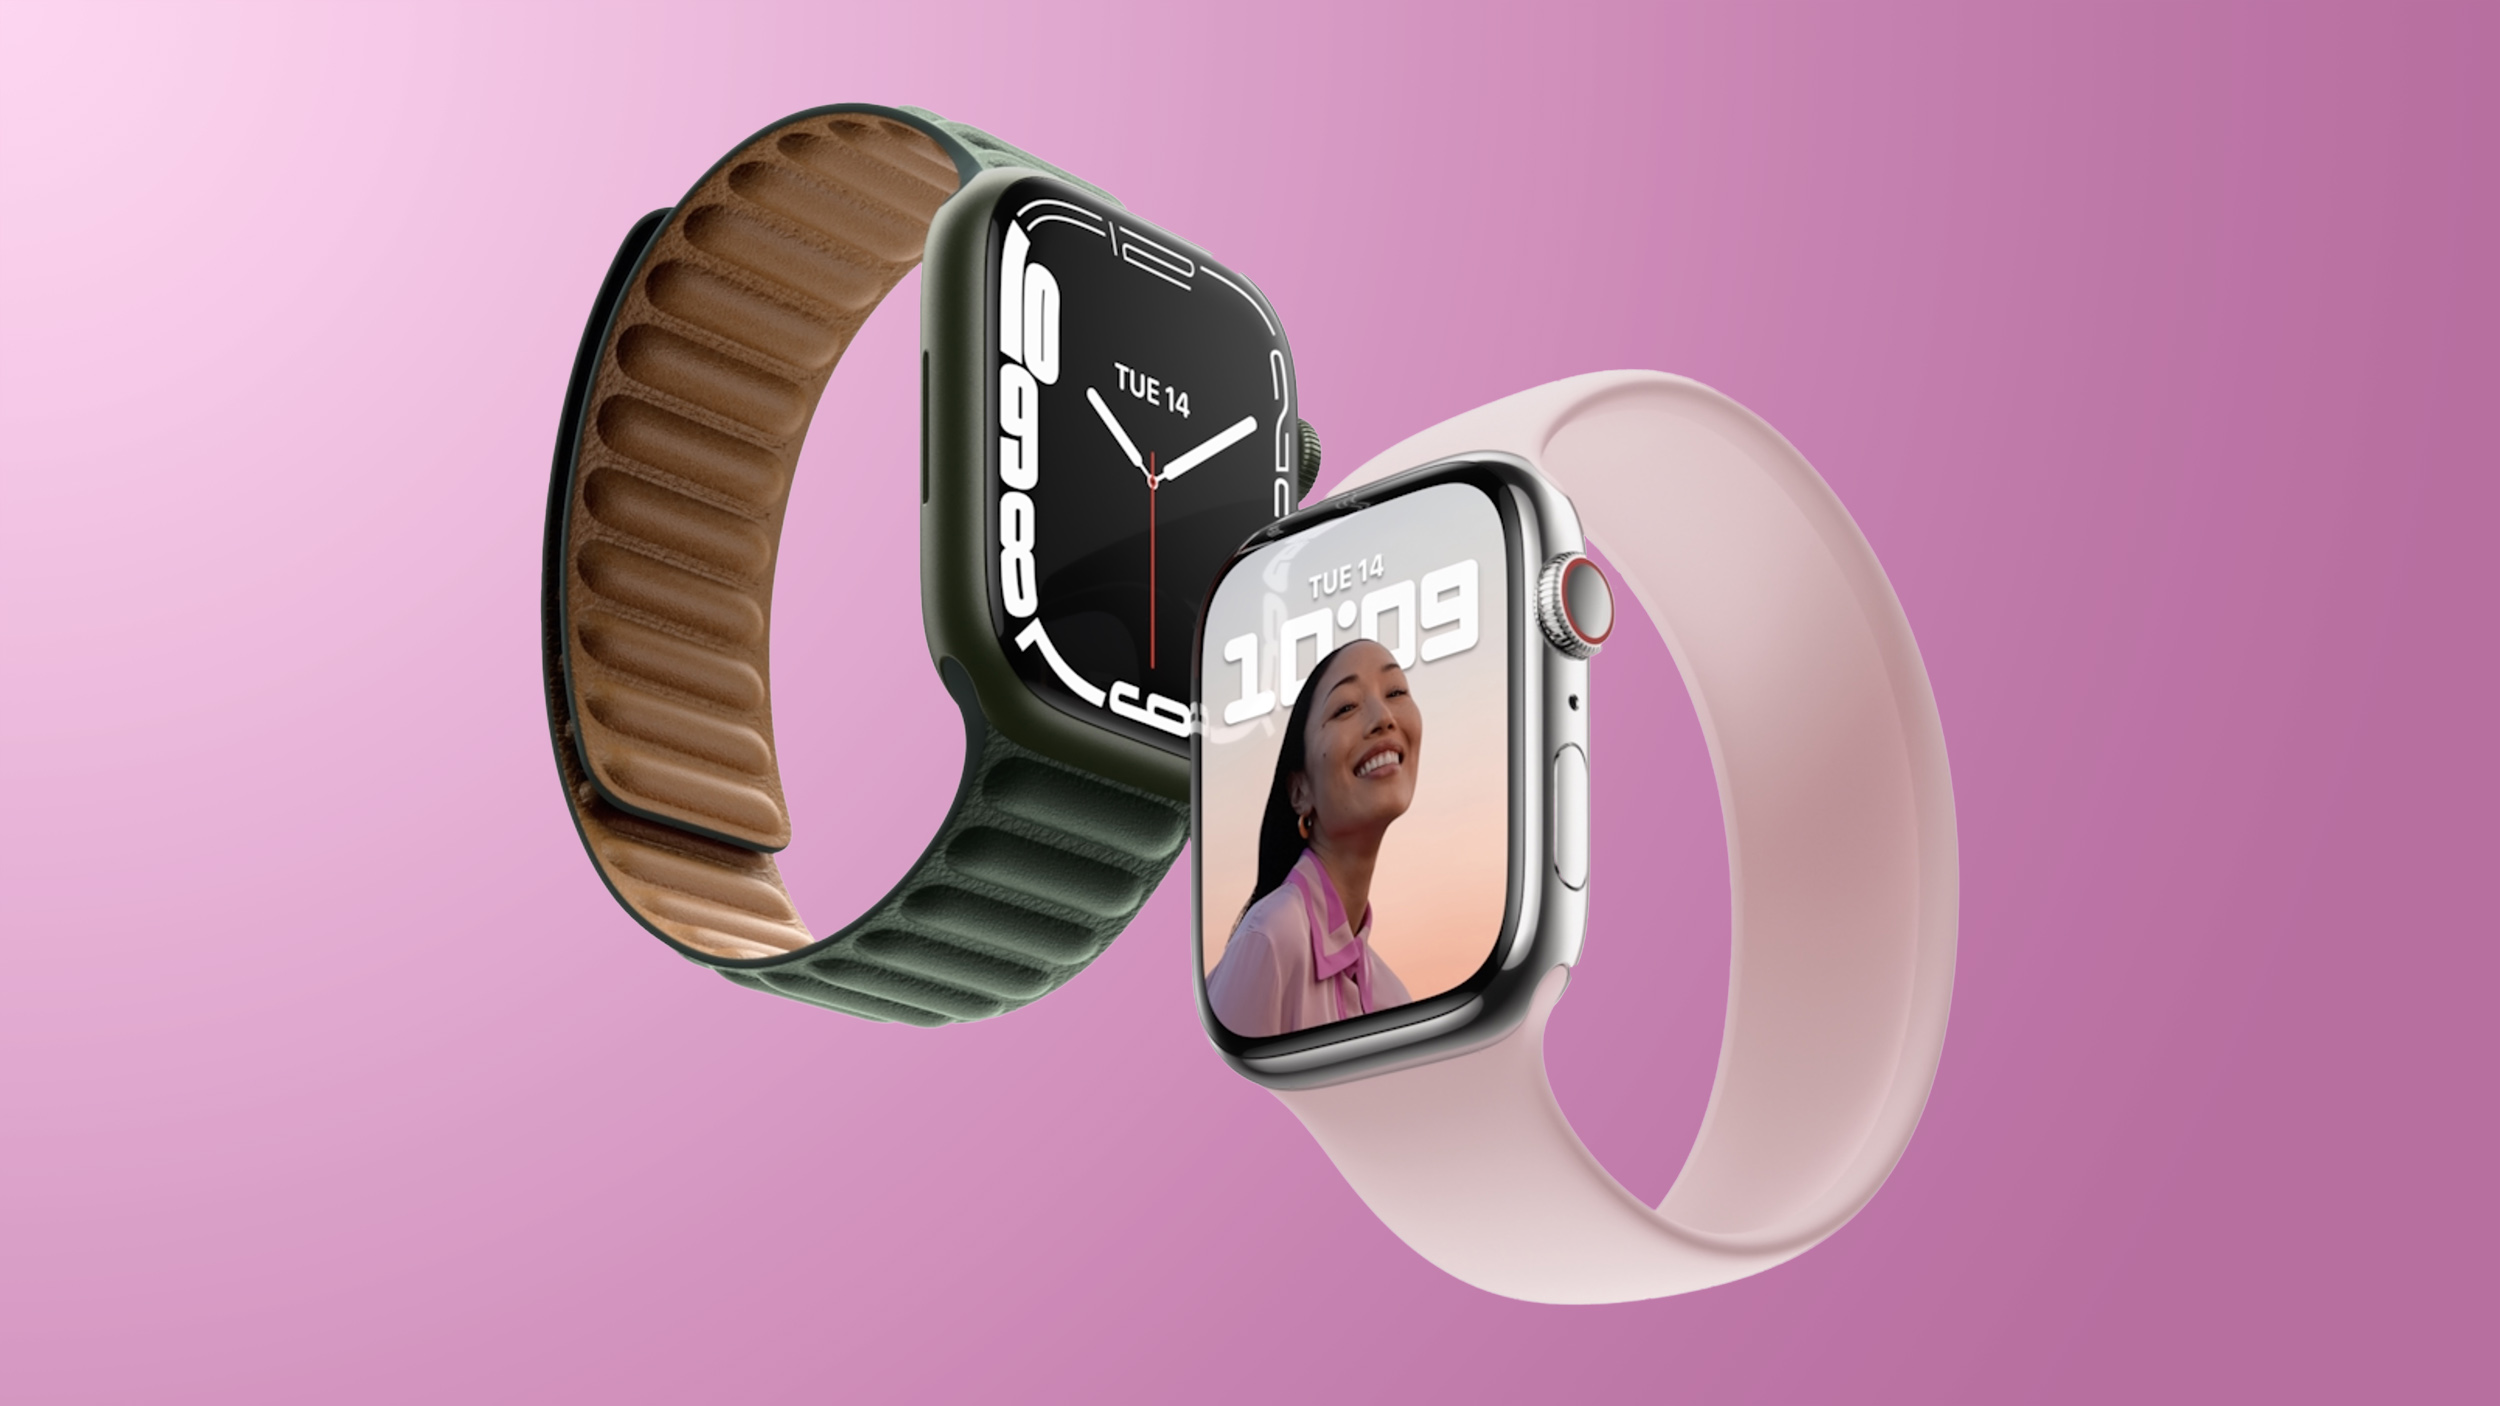 Rumored Apple Watch Lineup For 2022 To Include Three New Models Laptrinhx News 7454